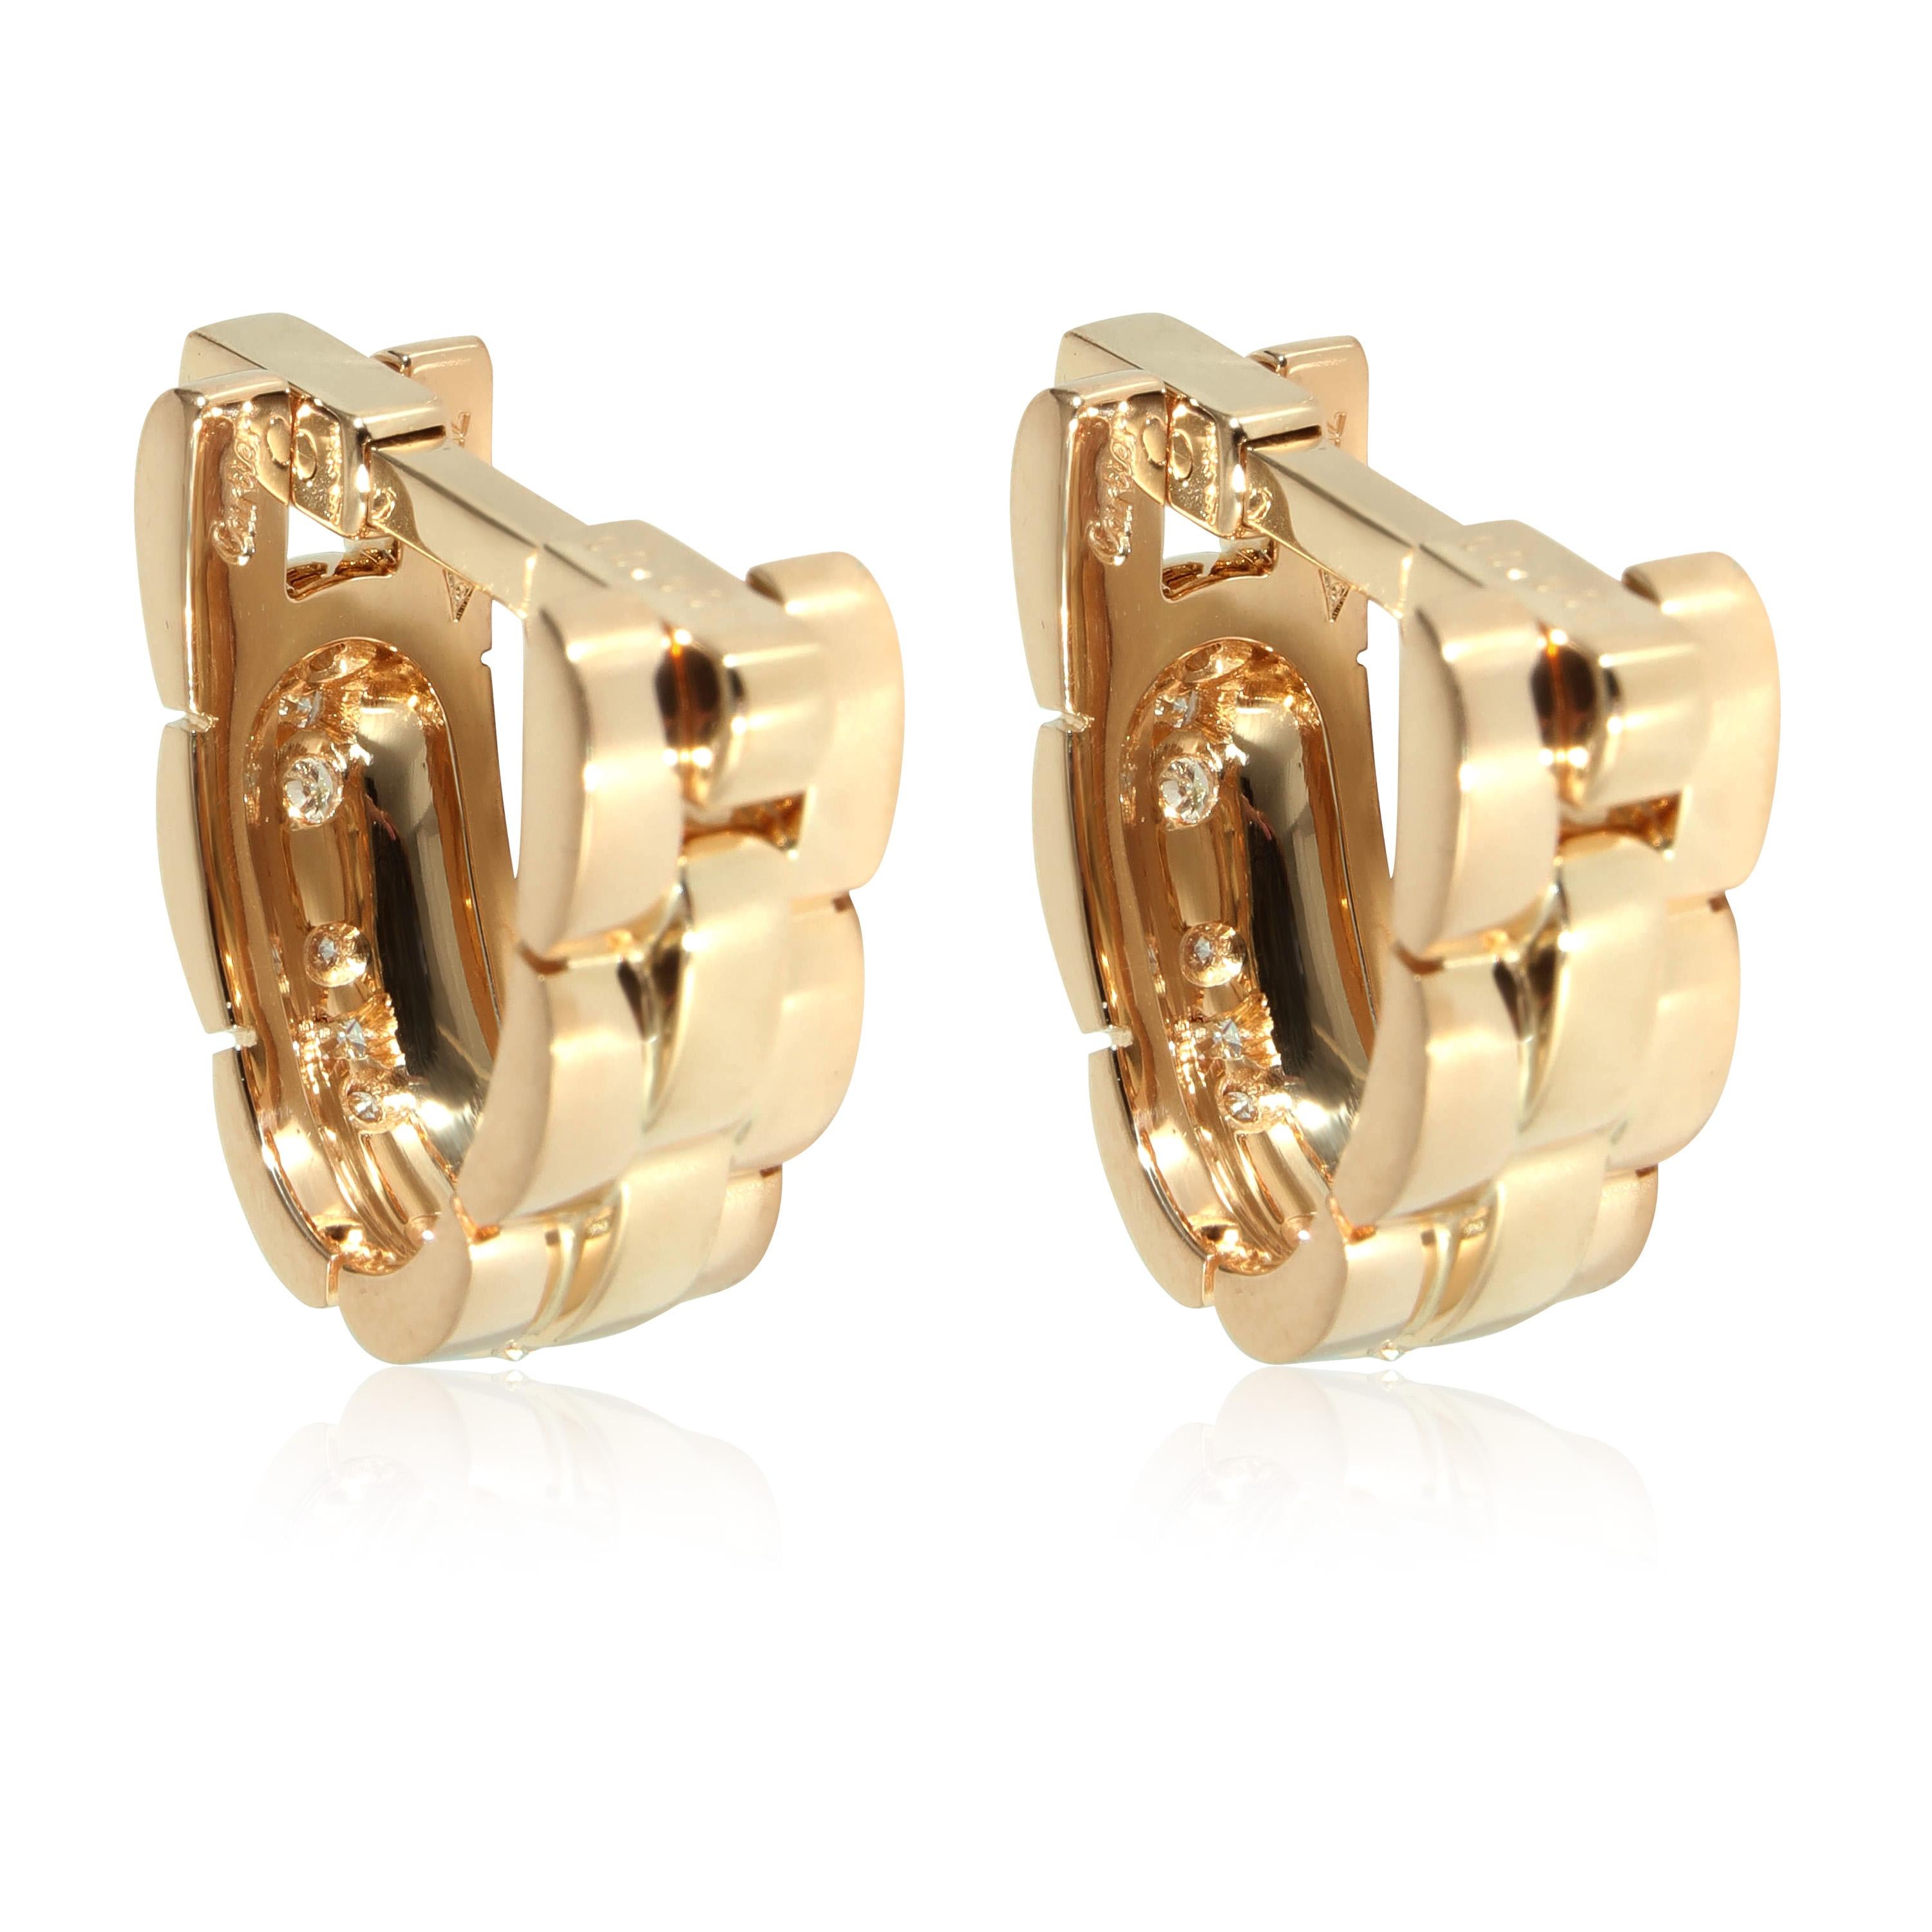 Women's or Men's Cartier Maillon Panthere Cufflinks in 18K Yellow Gold 0.35 CTW